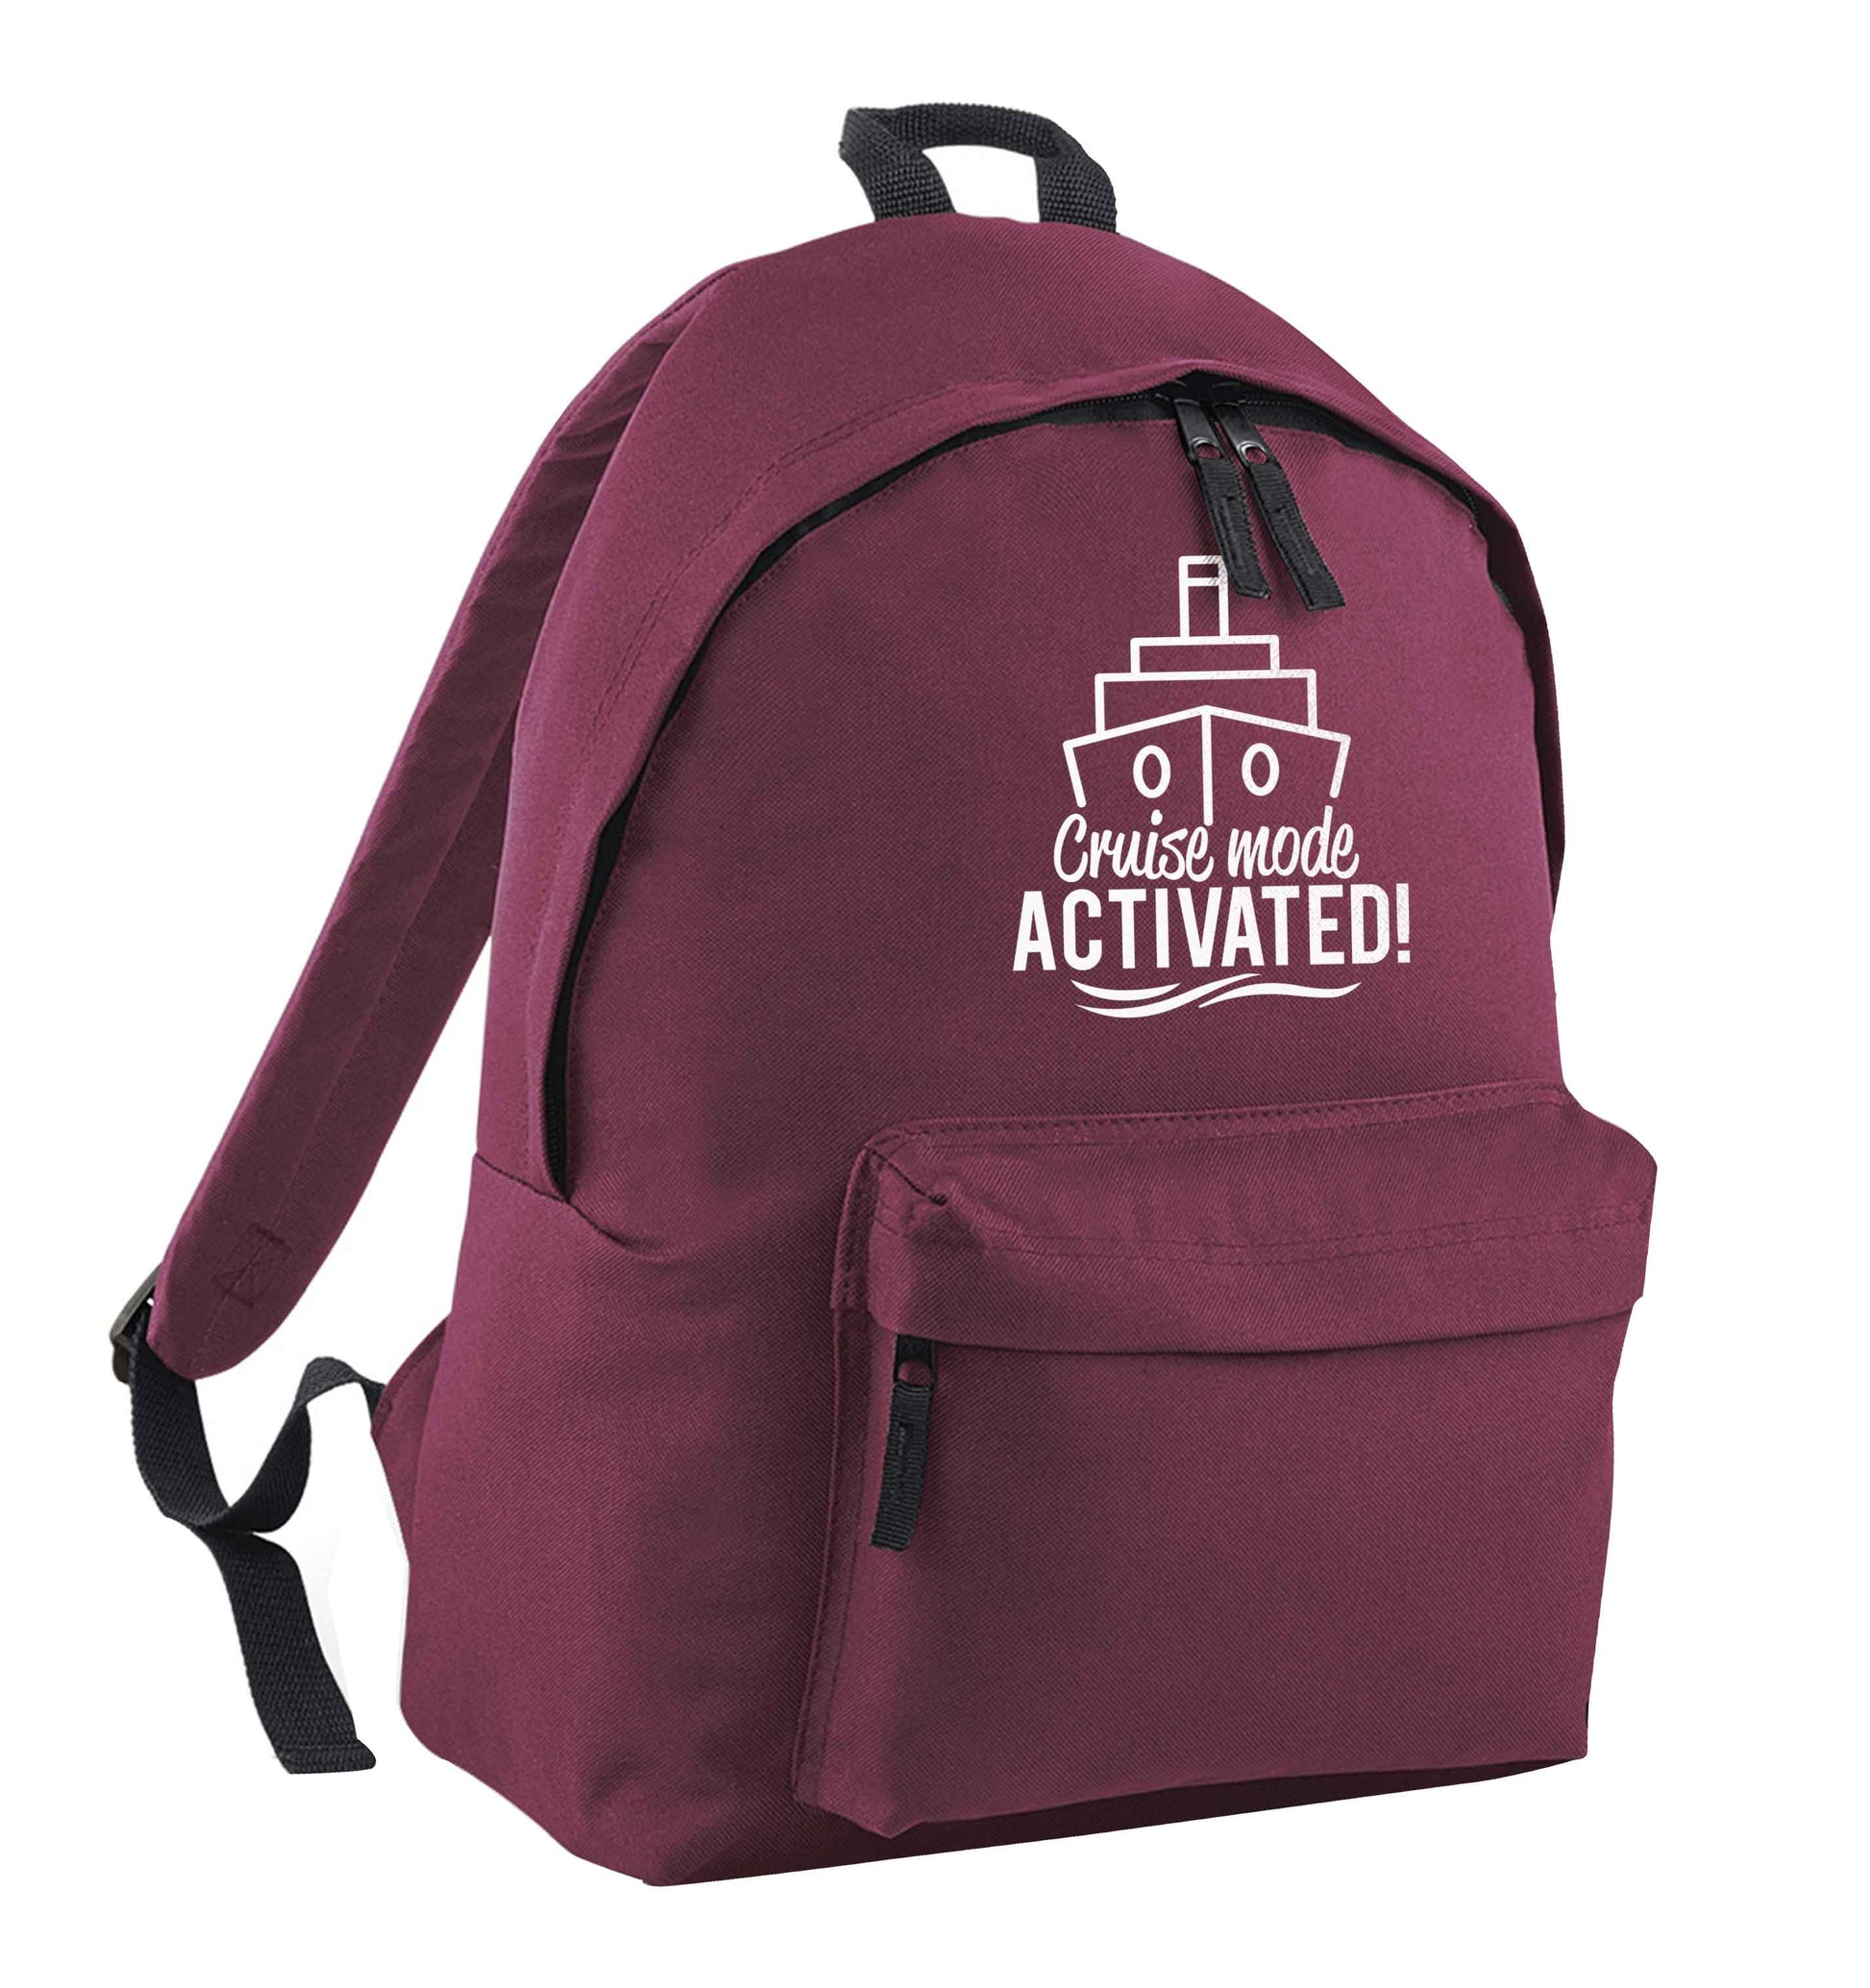 Cruise mode activated maroon children's backpack